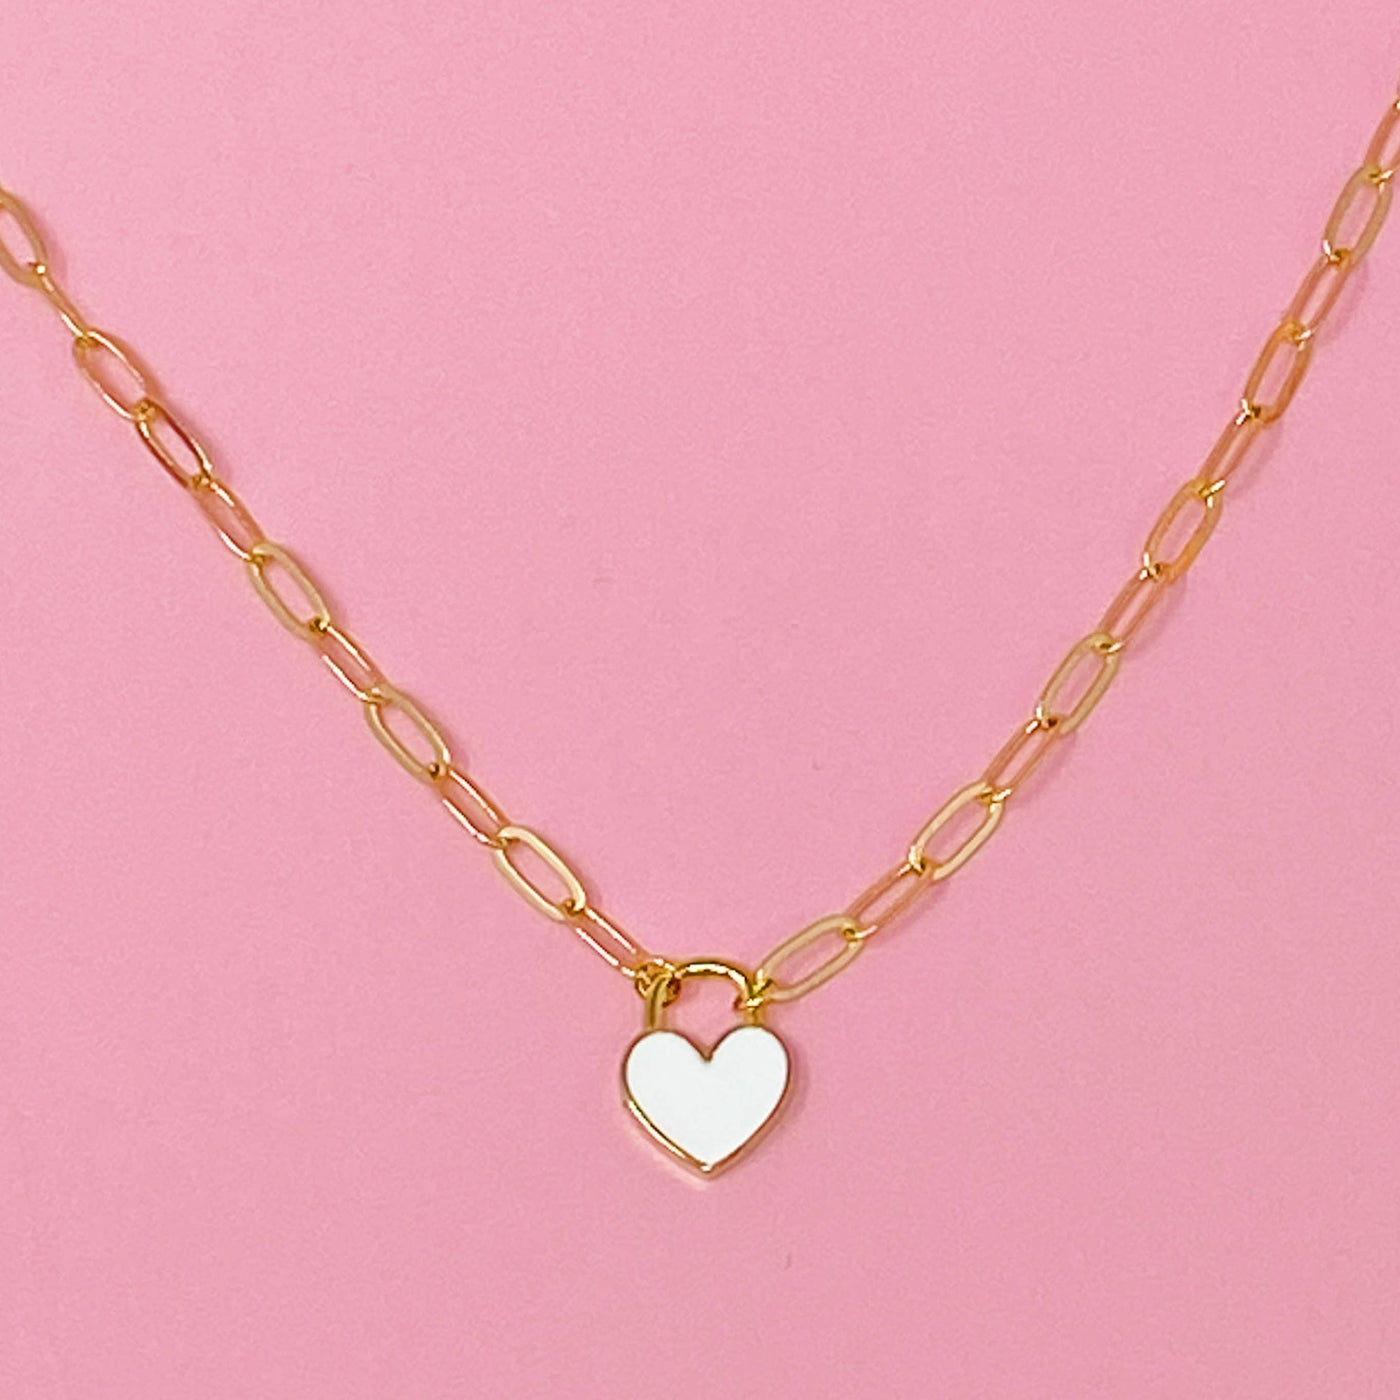 Colored & Locked Heart Necklace - 8855